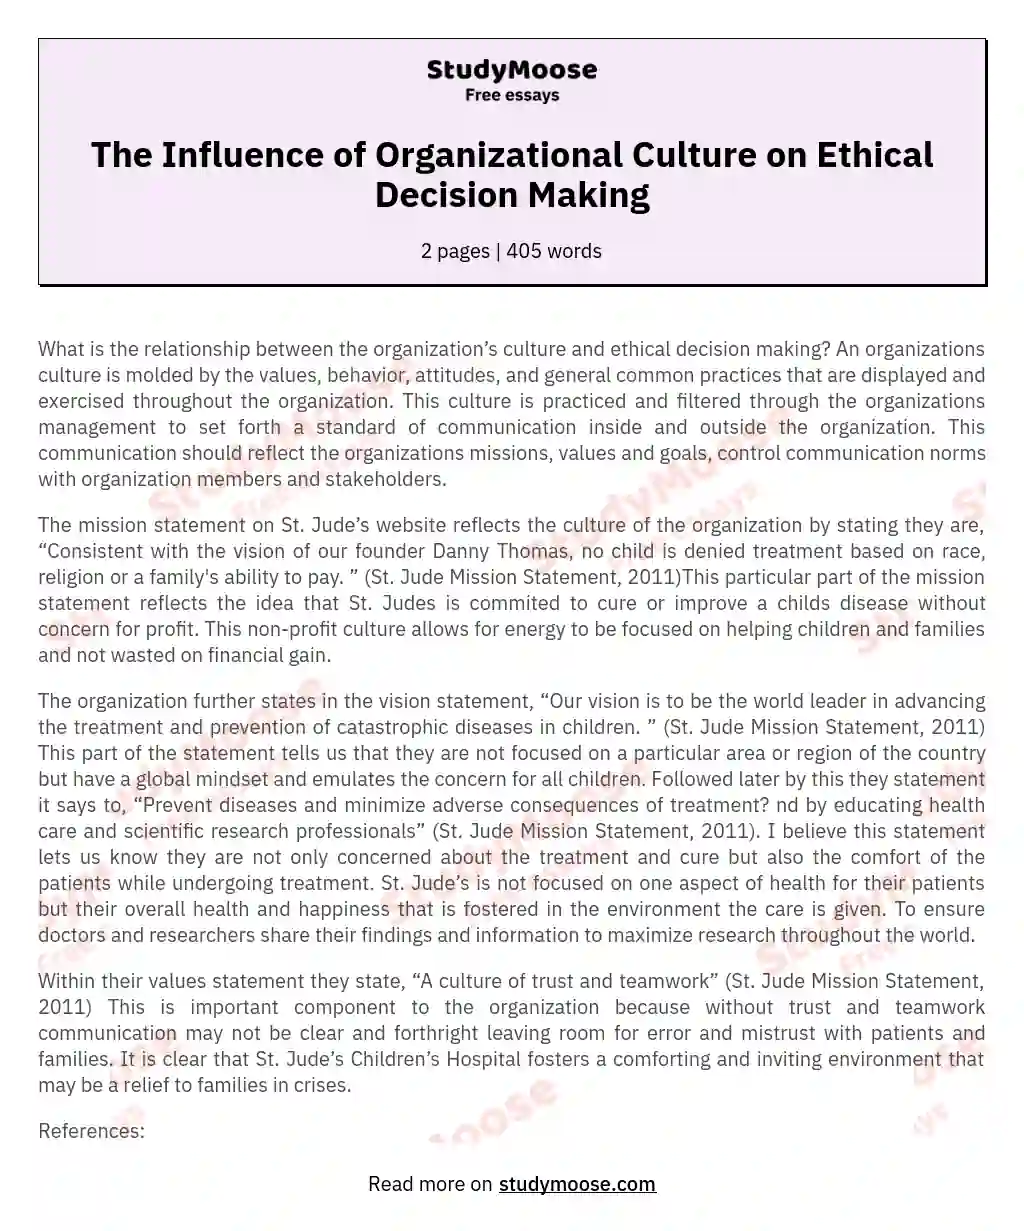 The Influence of Organizational Culture on Ethical Decision Making essay